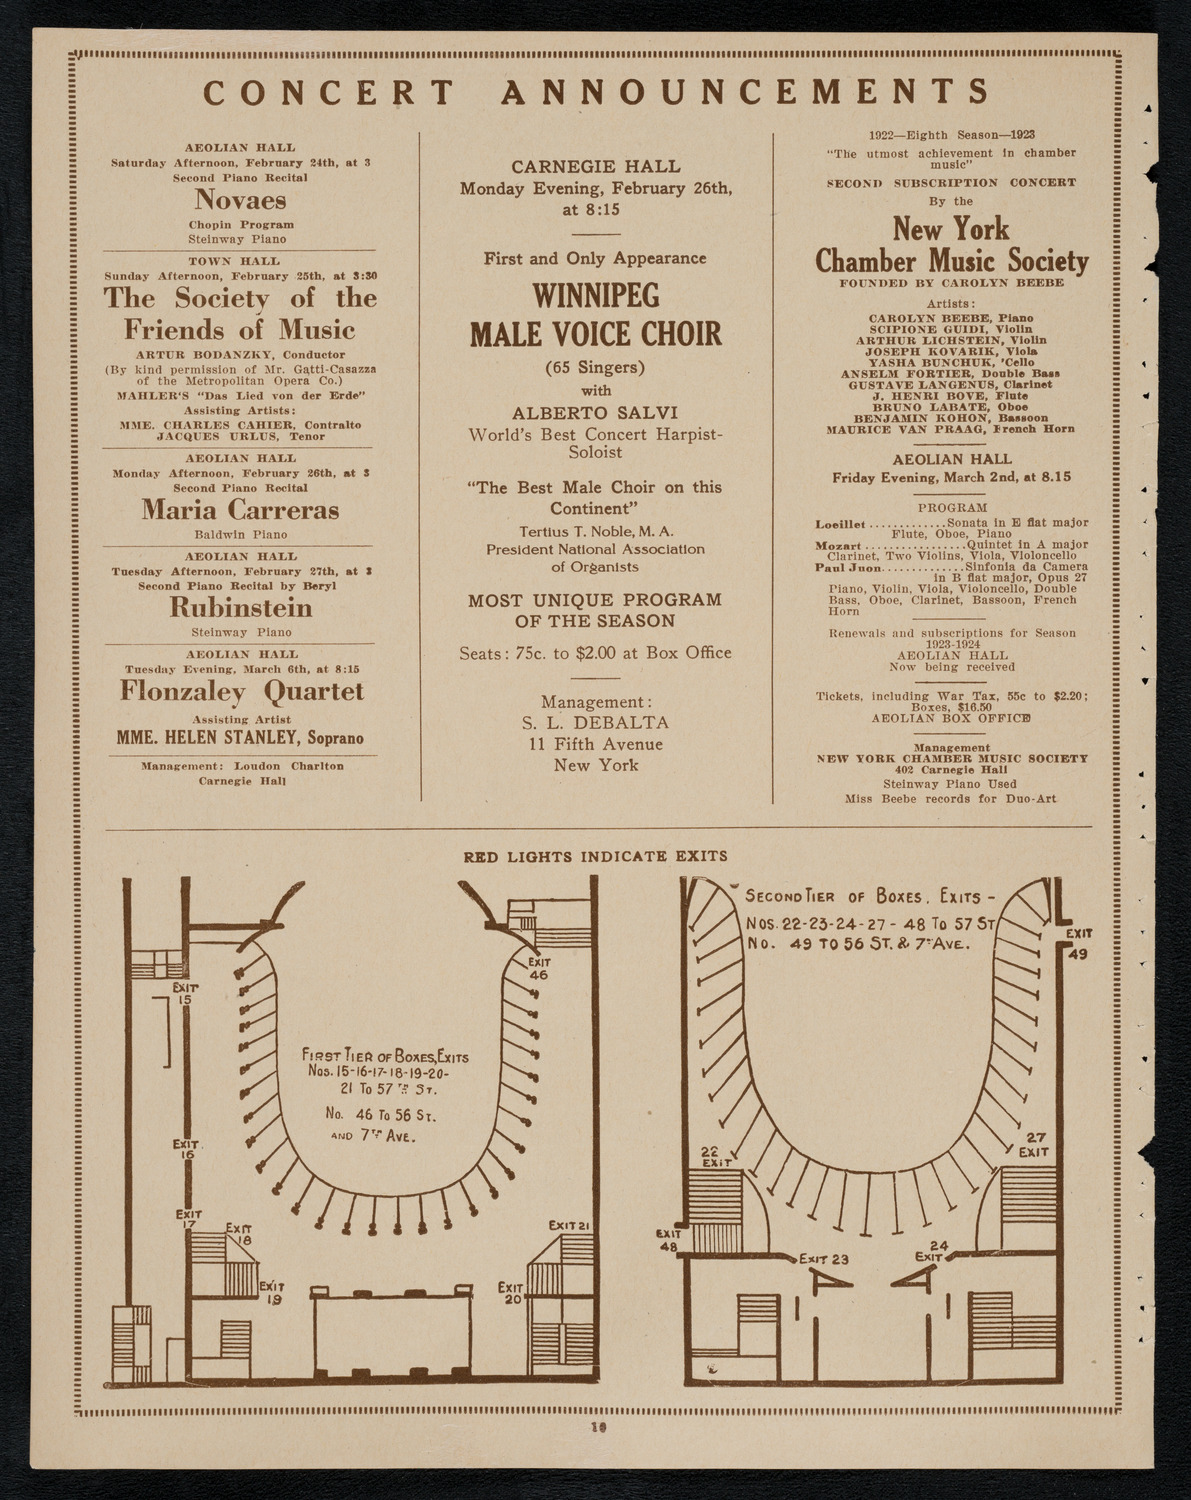 Universal Negro Improvement Association Meeting and Concert, February 23, 1923, program page 10